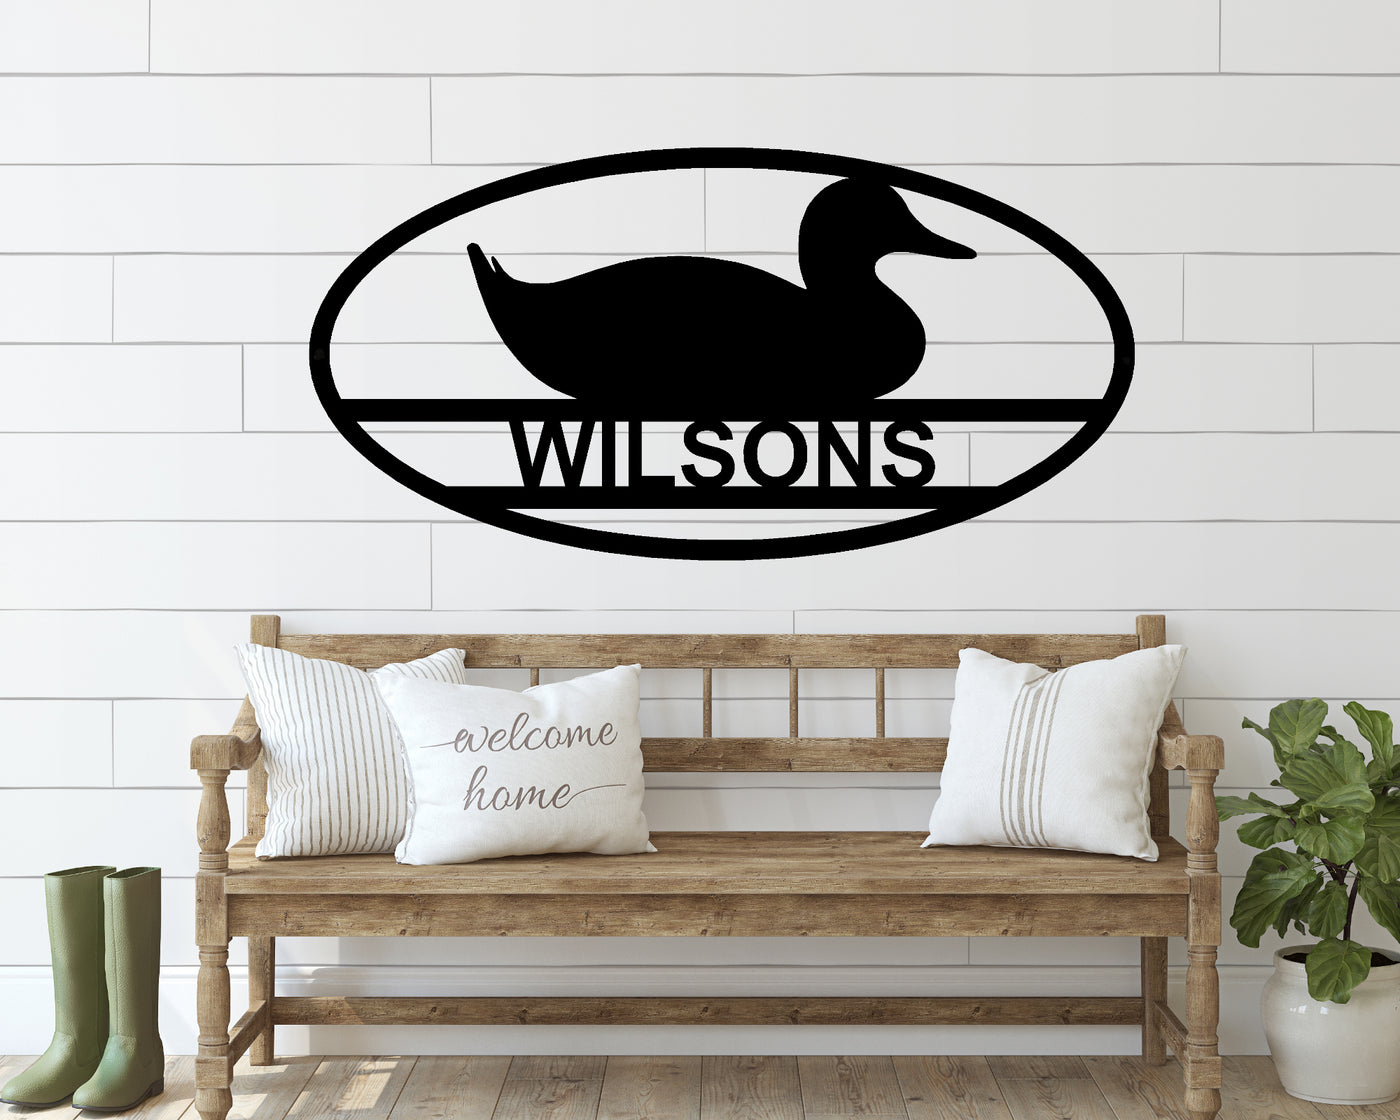 Personalized Duck Oval Metal Sign - Madison Iron and Wood - Metal Art - metal outdoor decor - Steel deocrations - american made products - veteran owned business products - fencing decorations - fencing supplies - custom wall decorations - personalized wall signs - steel - decorative post caps - steel post caps - metal post caps - brackets - structural brackets - home improvement - easter - easter decorations - easter gift - easter yard decor